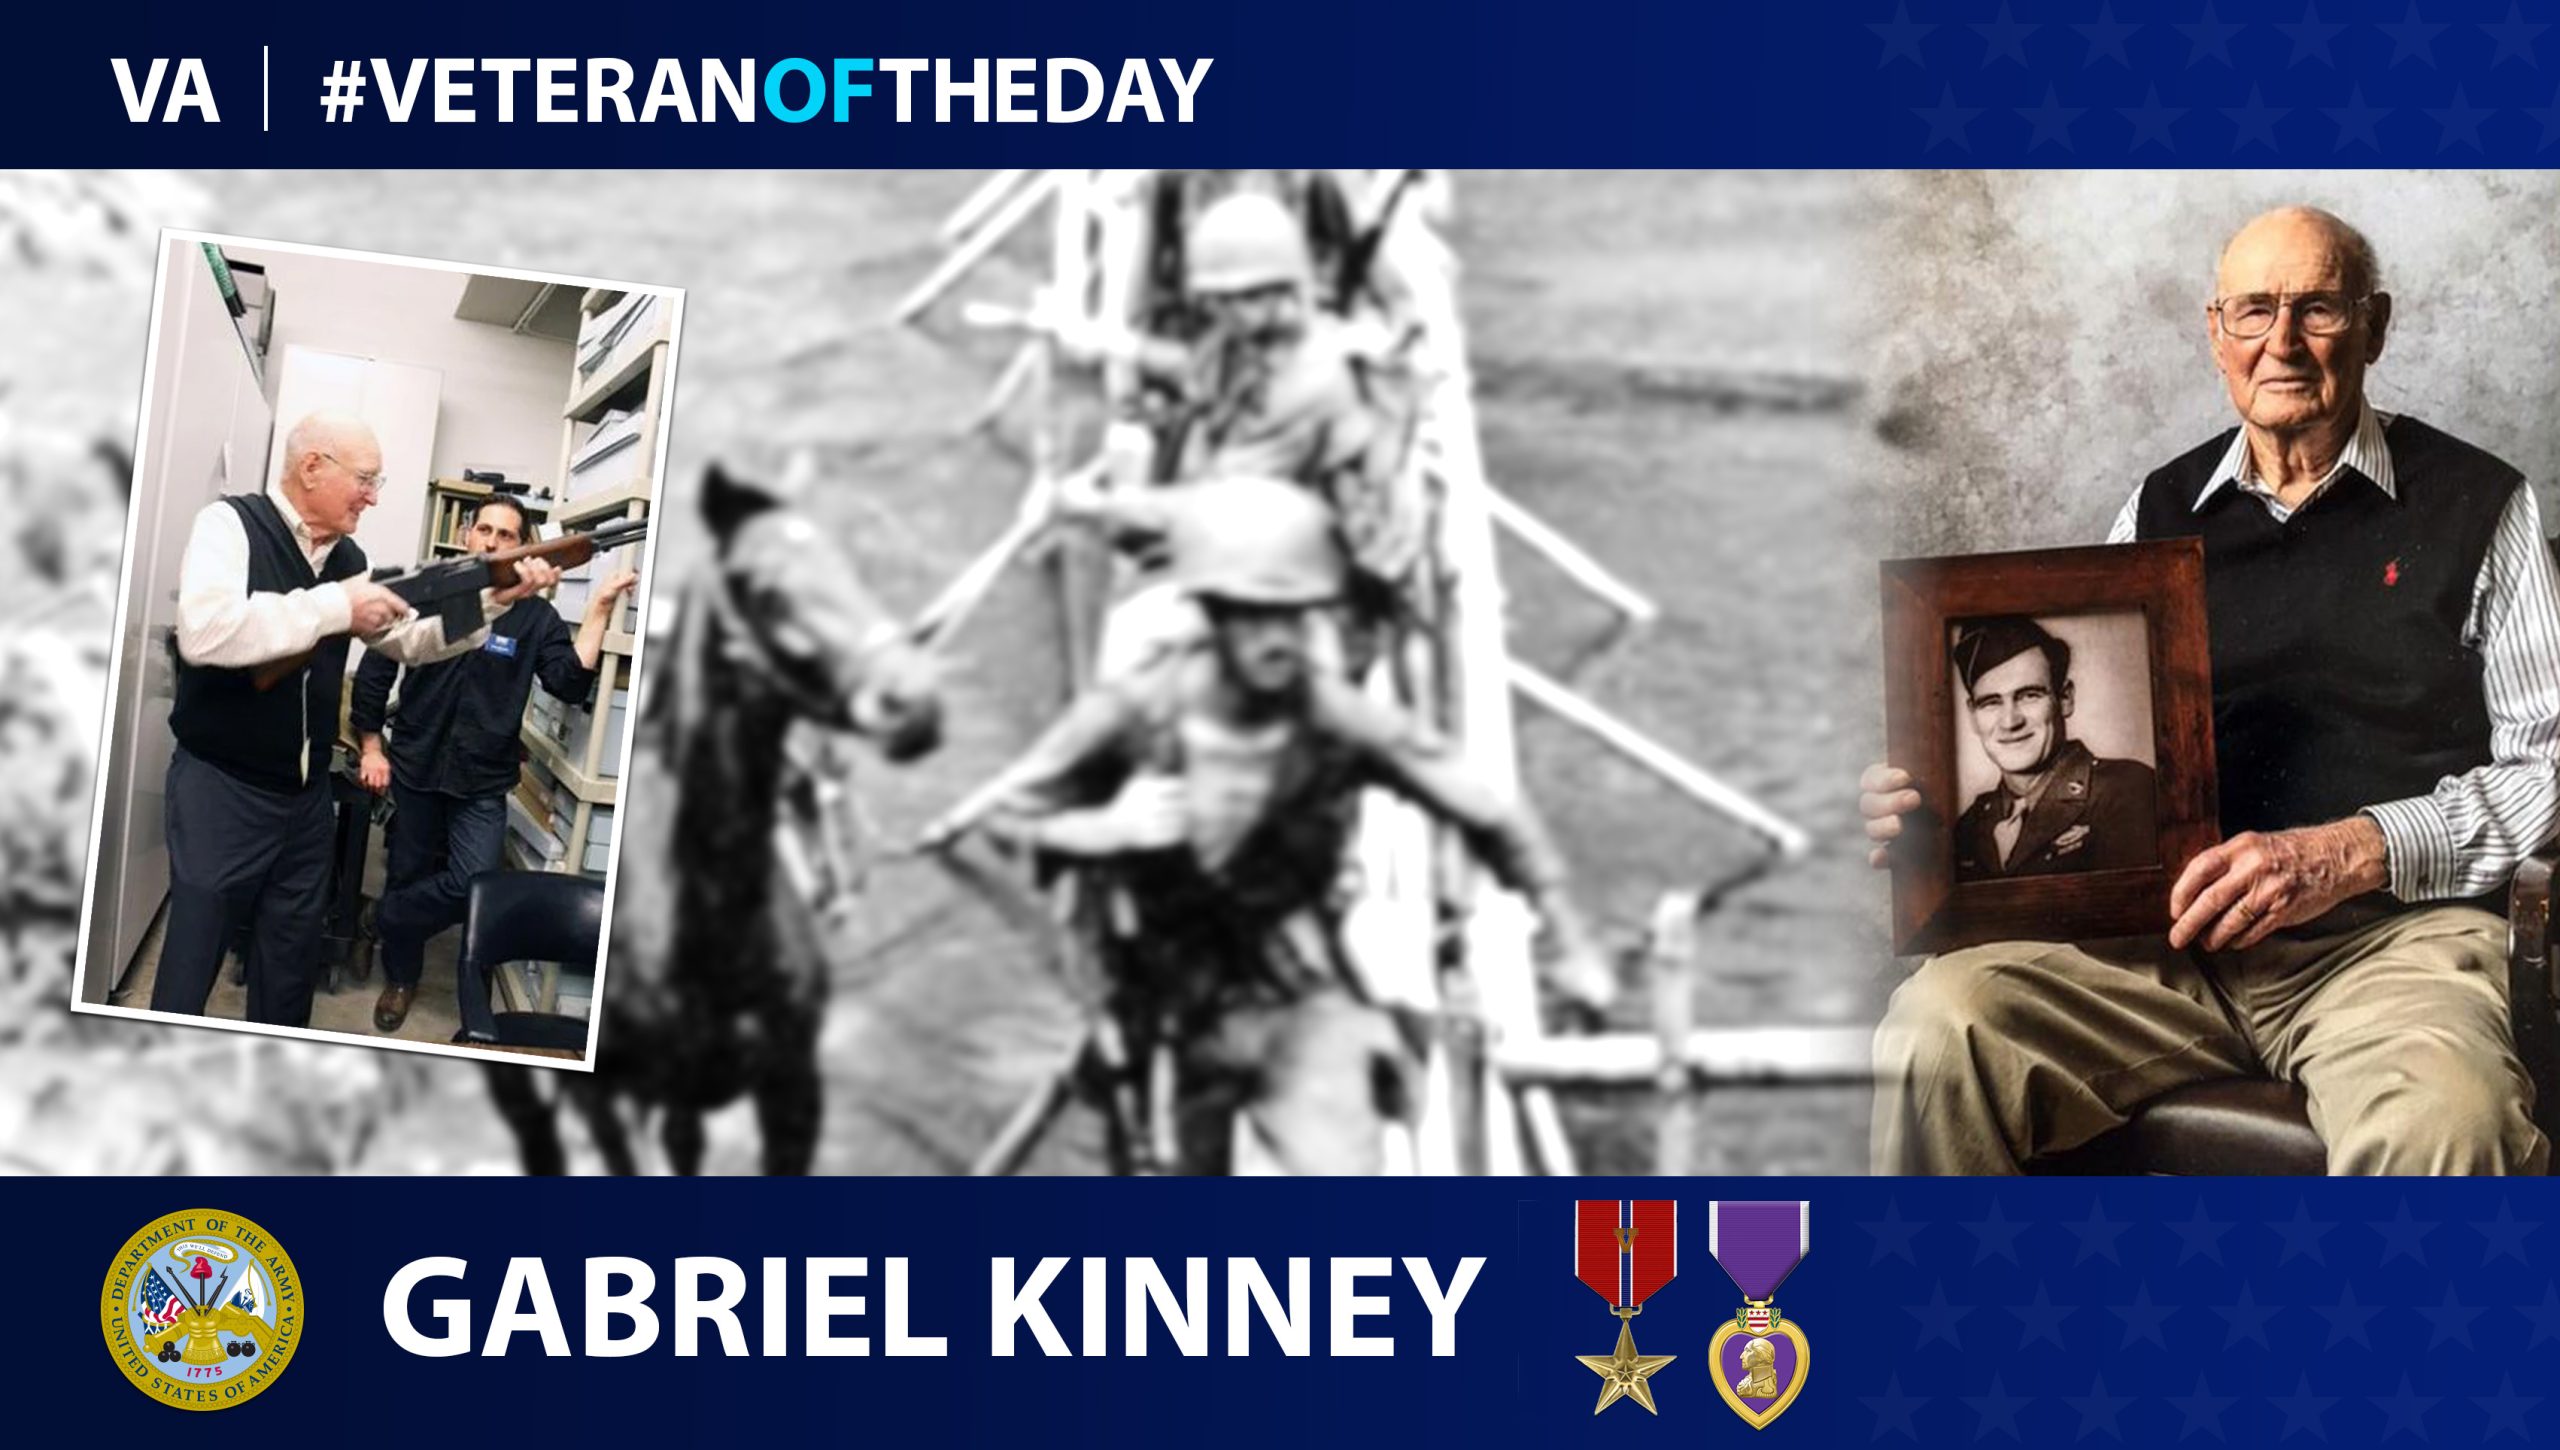 Army Veteran Gabriel Kinney is today’s Veteran of the Day.